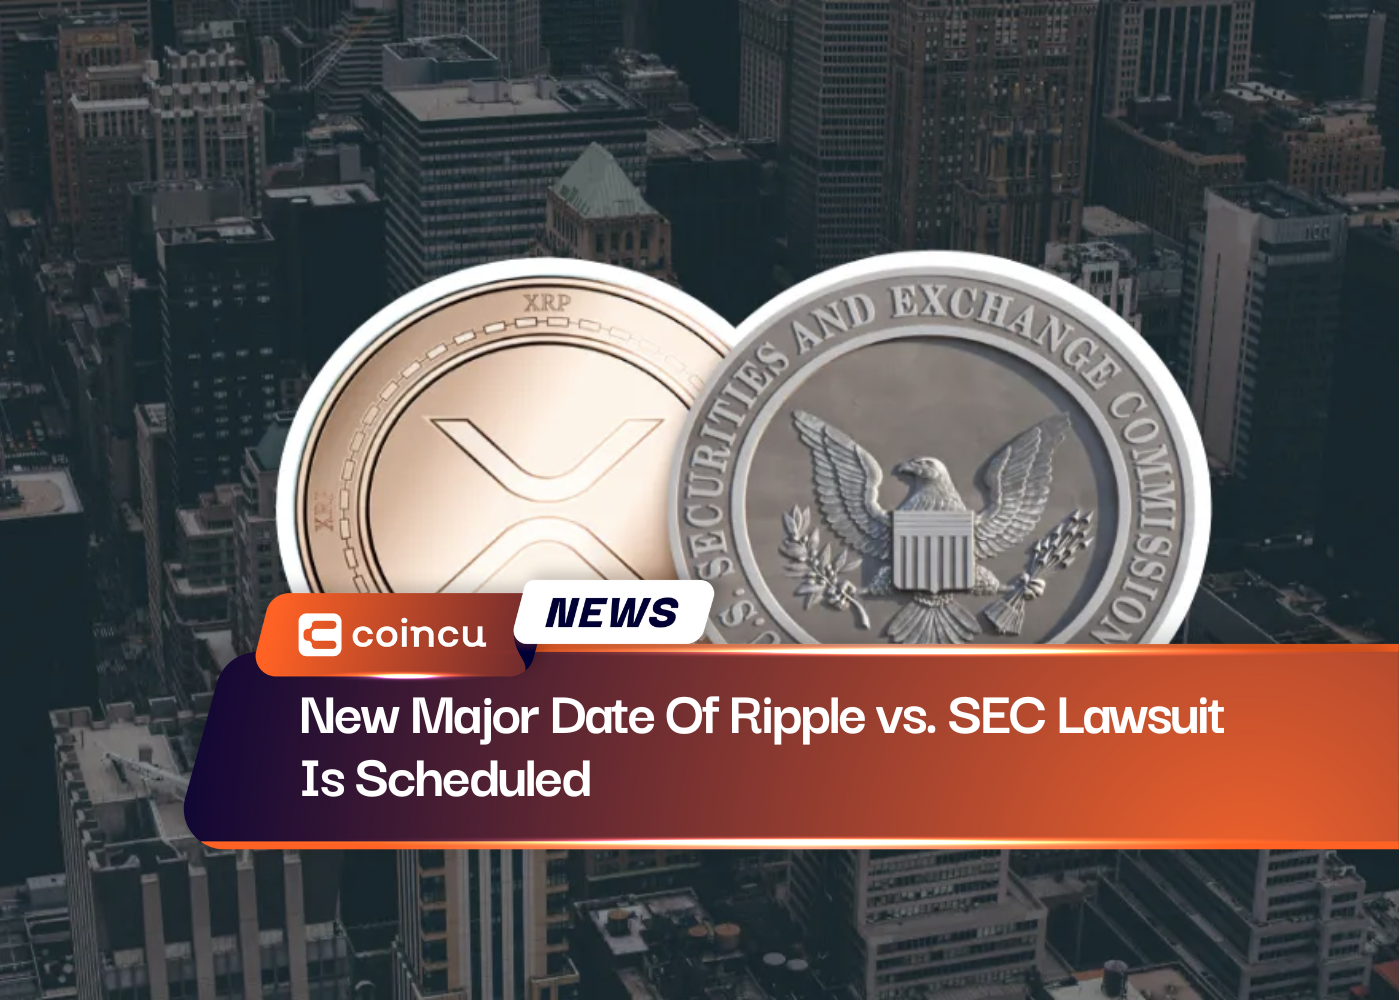 New Major Date Of Ripple vs. SEC Lawsuit Is Scheduled